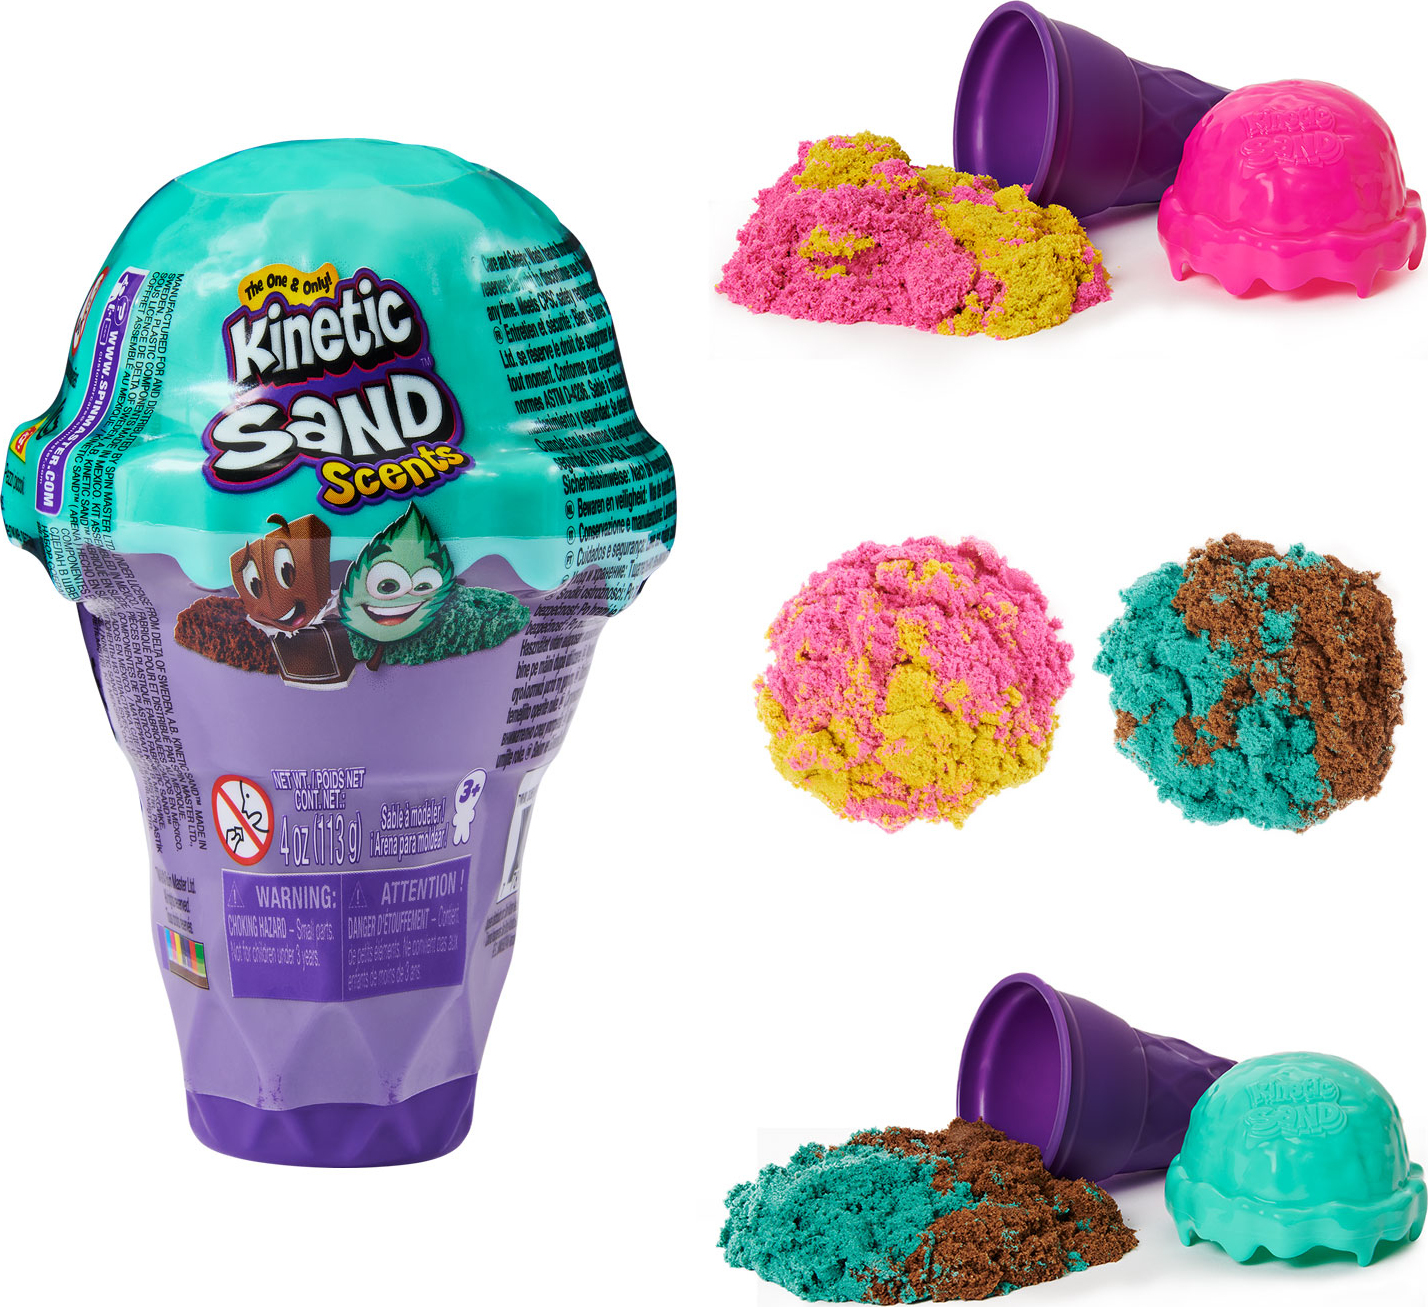 Kinetic Sand Scents, 4oz Ice Cream Cone Container with 2 Colors of